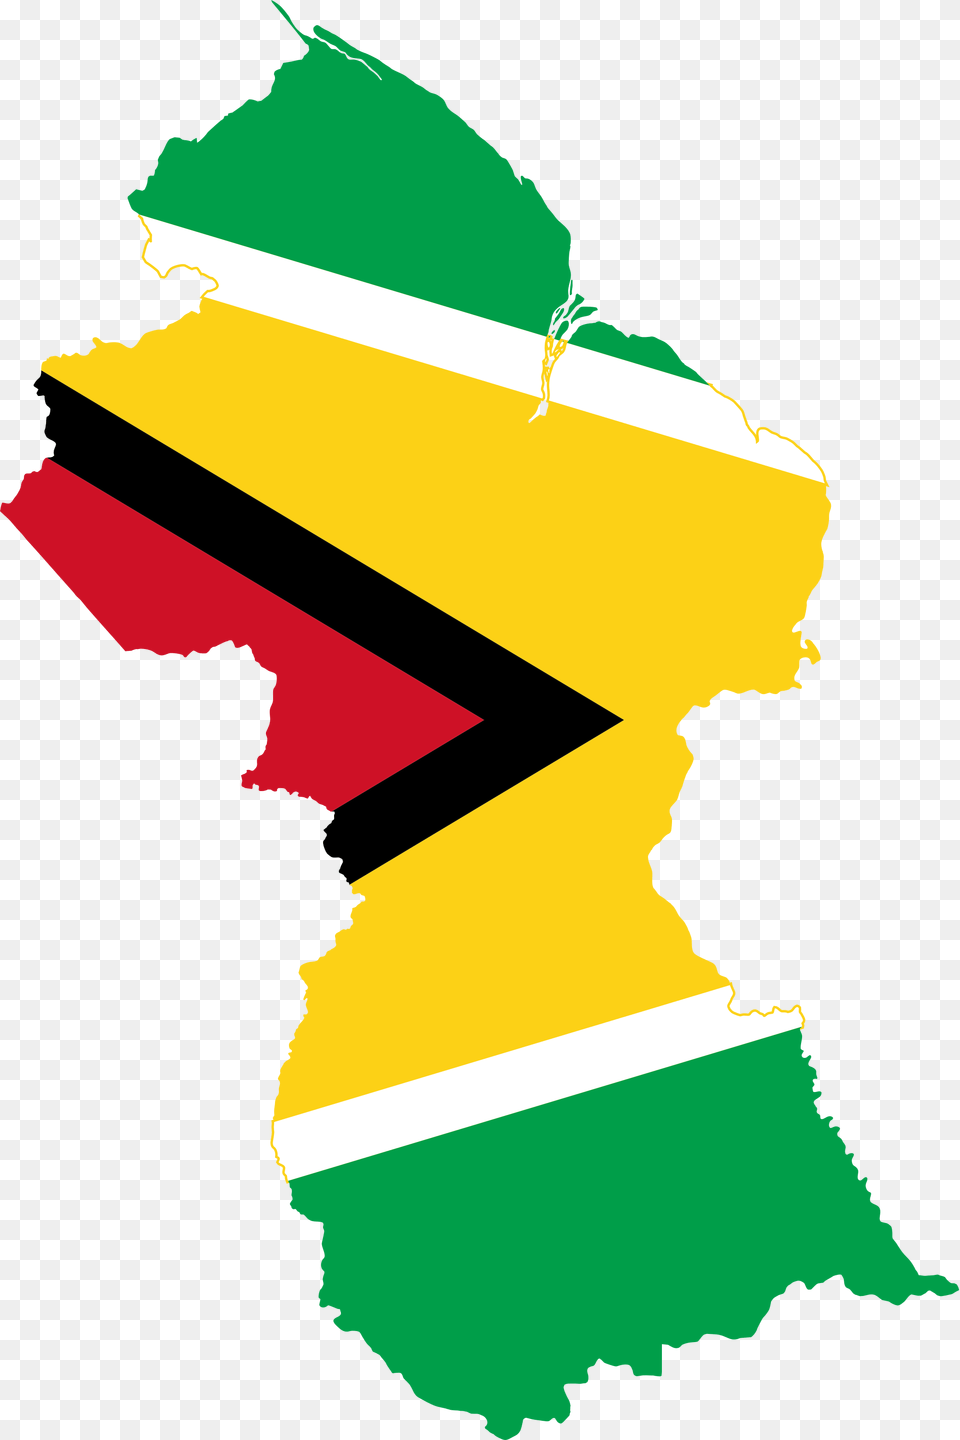 South American Flags South American Countries Guyana Map Of Guyana Showing Administrative, Chart, Plot, Person, Art Free Transparent Png